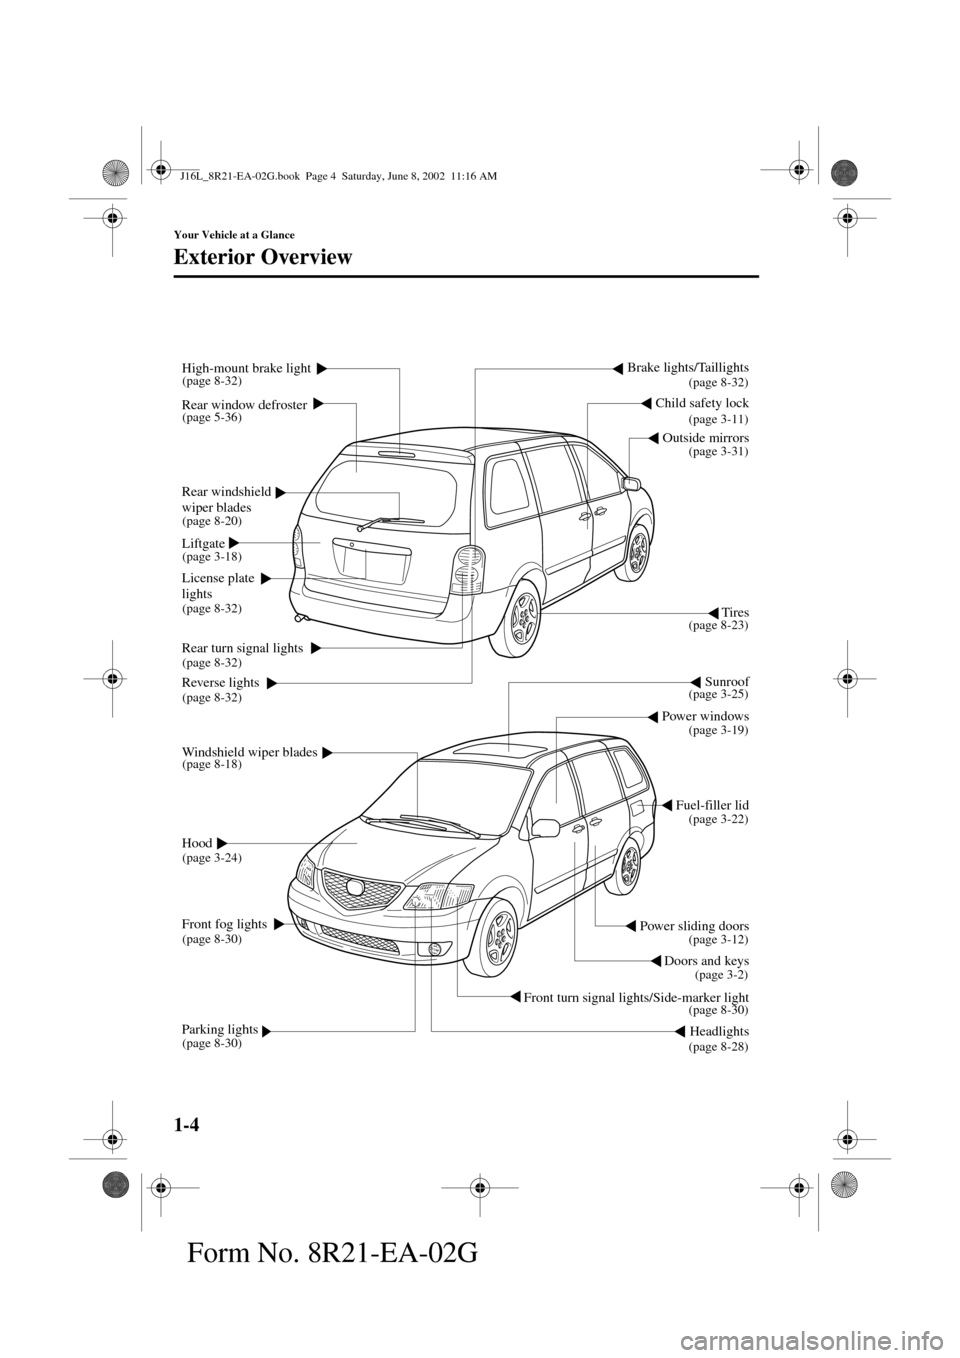 MAZDA MODEL MPV 2003  Owners Manual (in English) 1-4
Your Vehicle at a Glance
Form No. 8R21-EA-02G
Exterior Overview
Windshield wiper blades
Power windows
Hood
Front fog lights
Front turn signal lights/Side-marker light
Headlights
Fuel-filler lid
Do